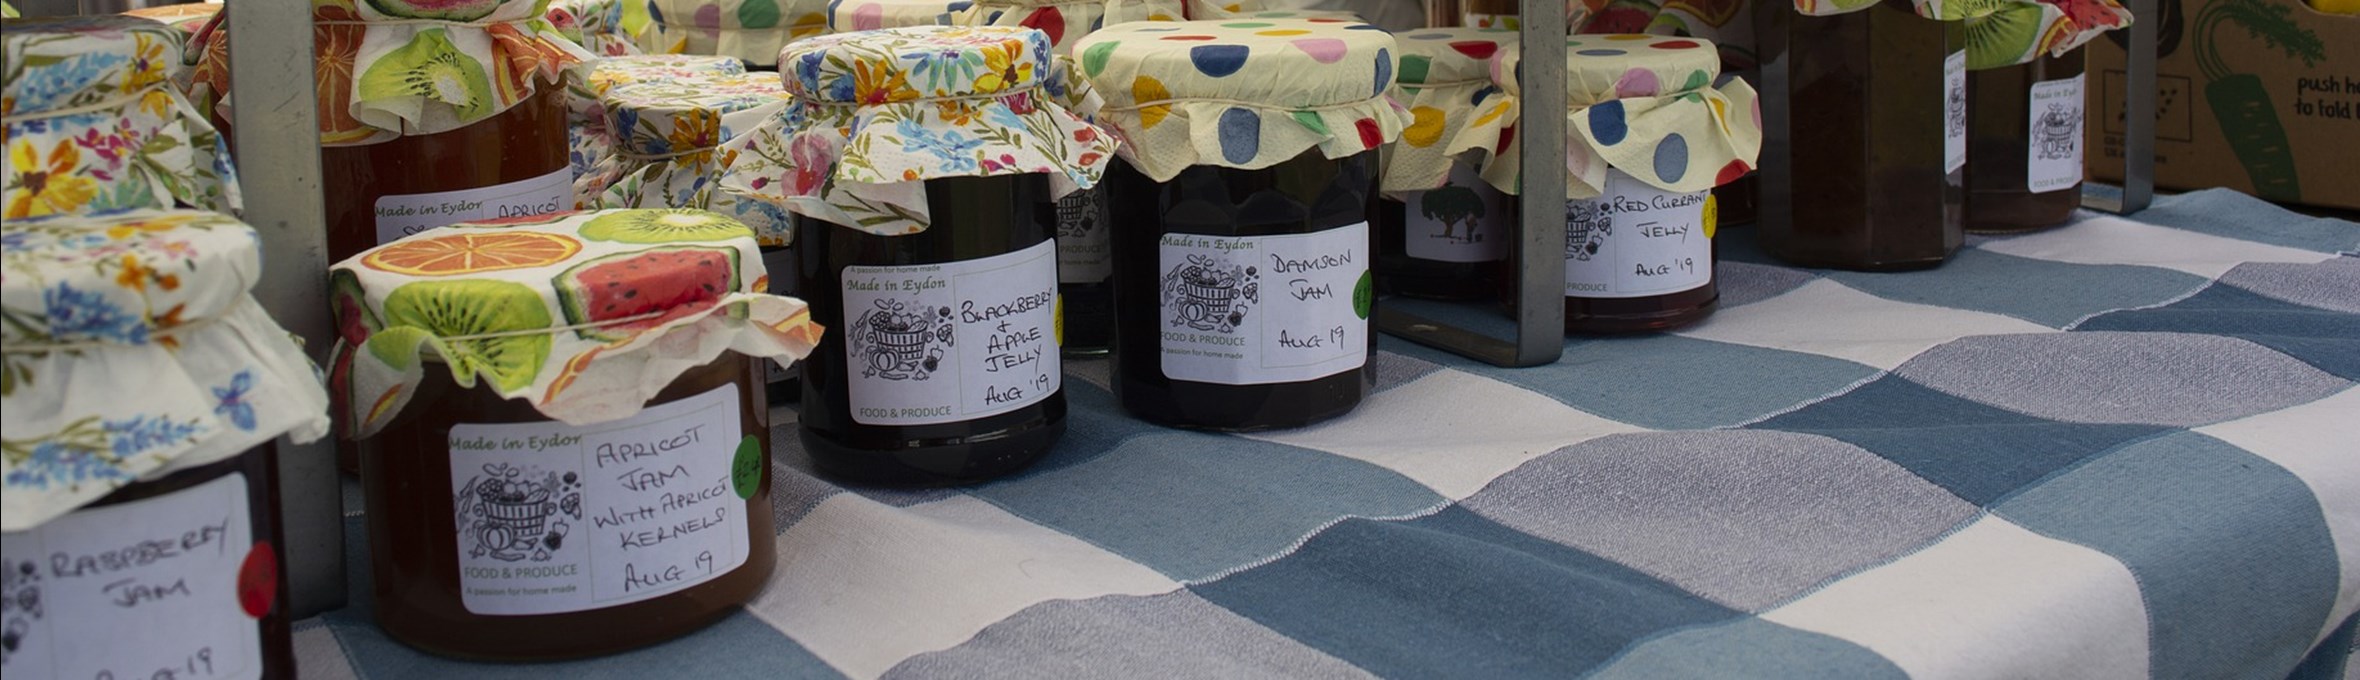 Jars of jam on a stall at a fete